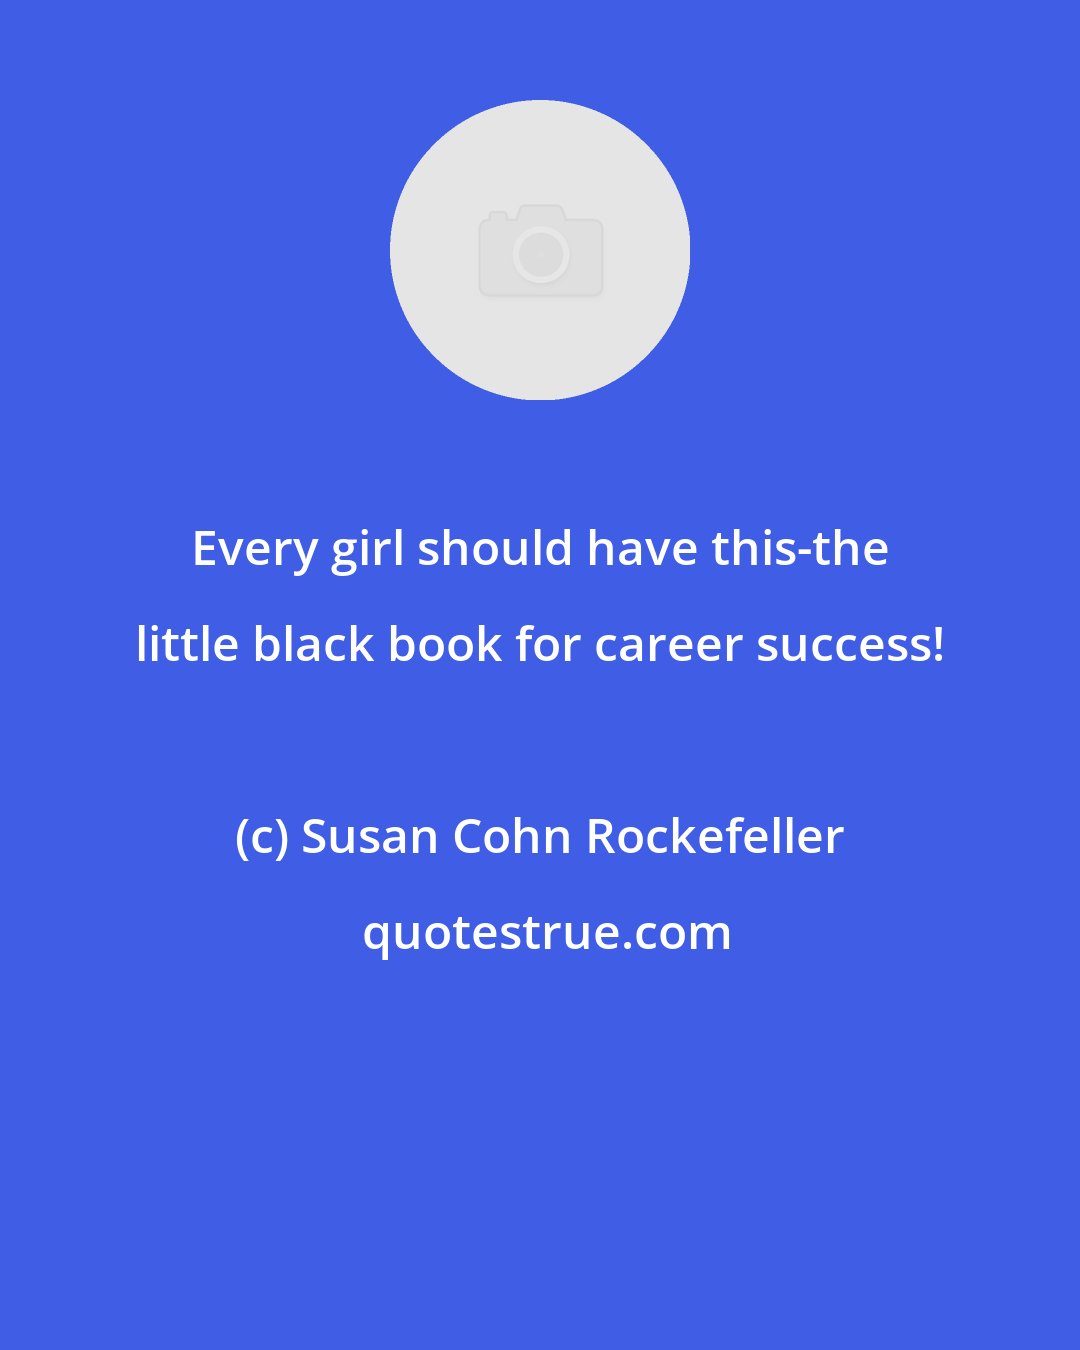 Susan Cohn Rockefeller: Every girl should have this-the little black book for career success!